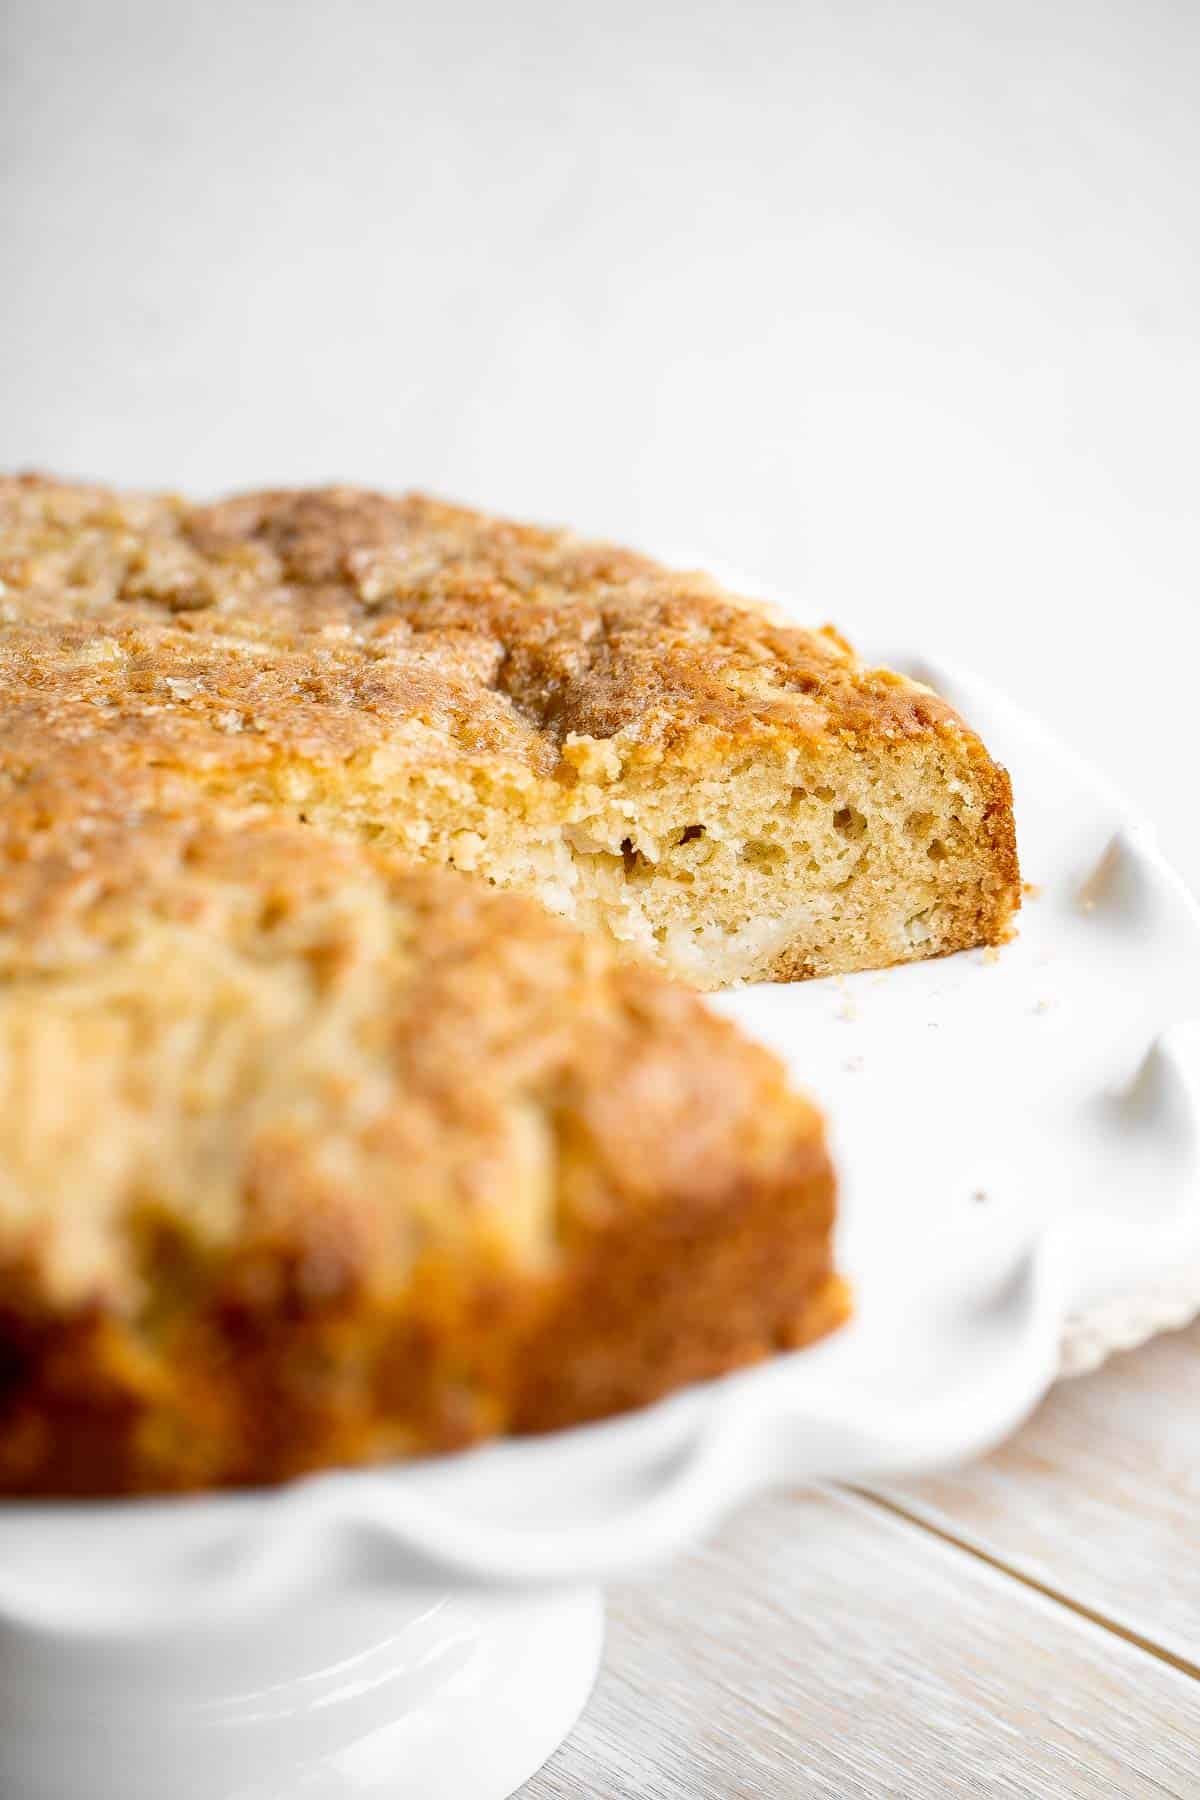 Easy Apple Cake has a dense and moist crumb and is loaded with fresh apples, cinnamon sugar, and nuts. It’s quick, easy, and ready to eat in under an hour. | aheadofthyme.com